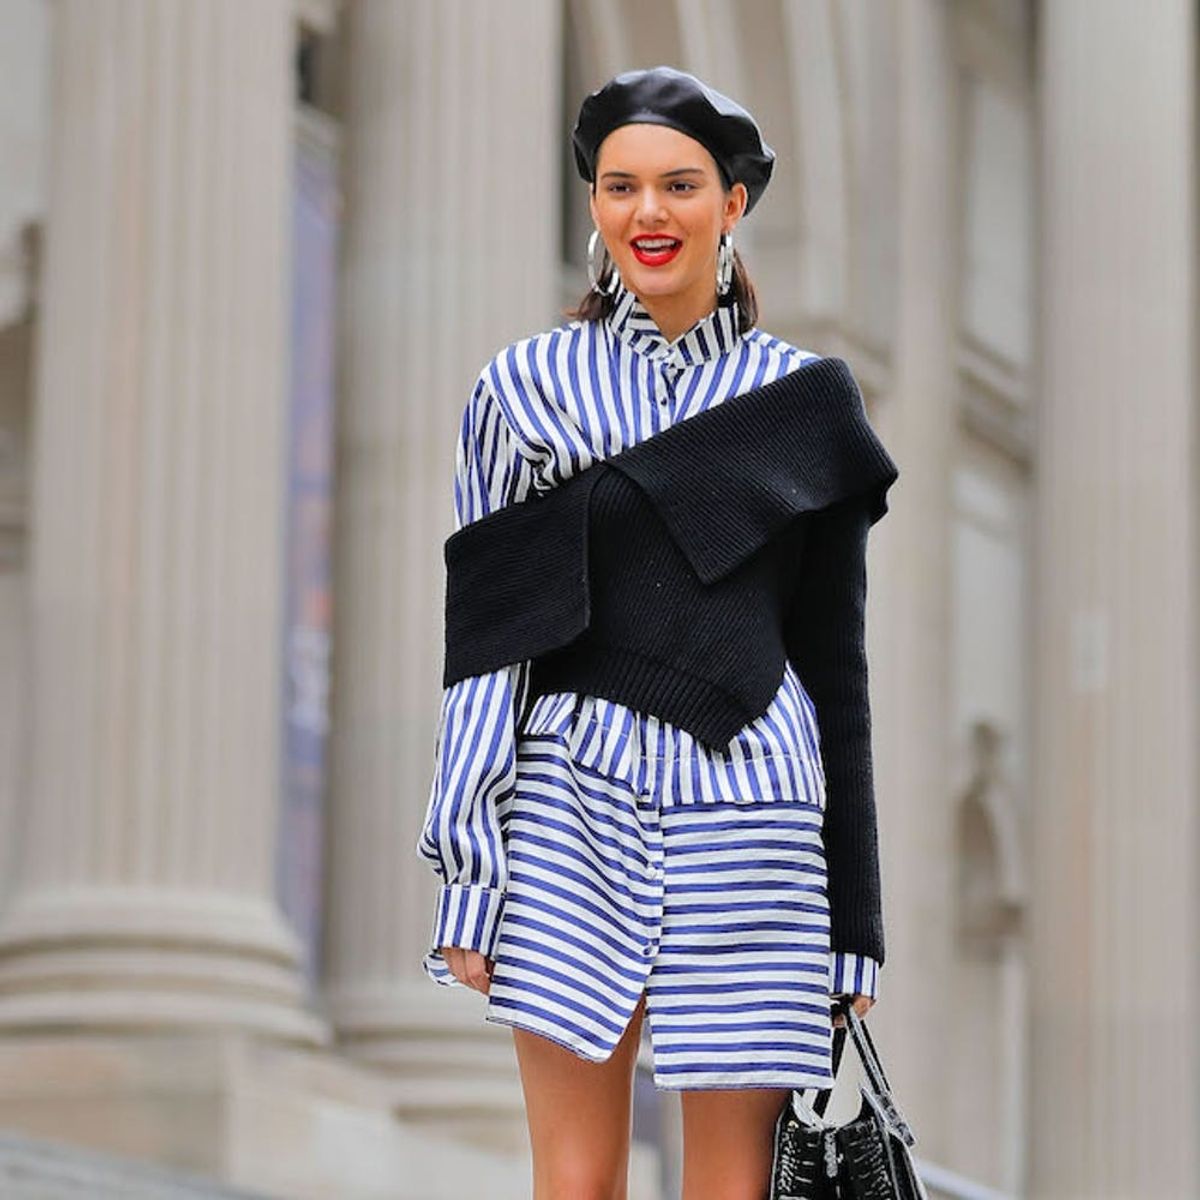 Spotted: Kendall Jenner Pulls a Blair Waldorf on the Metropolitan Museum Steps